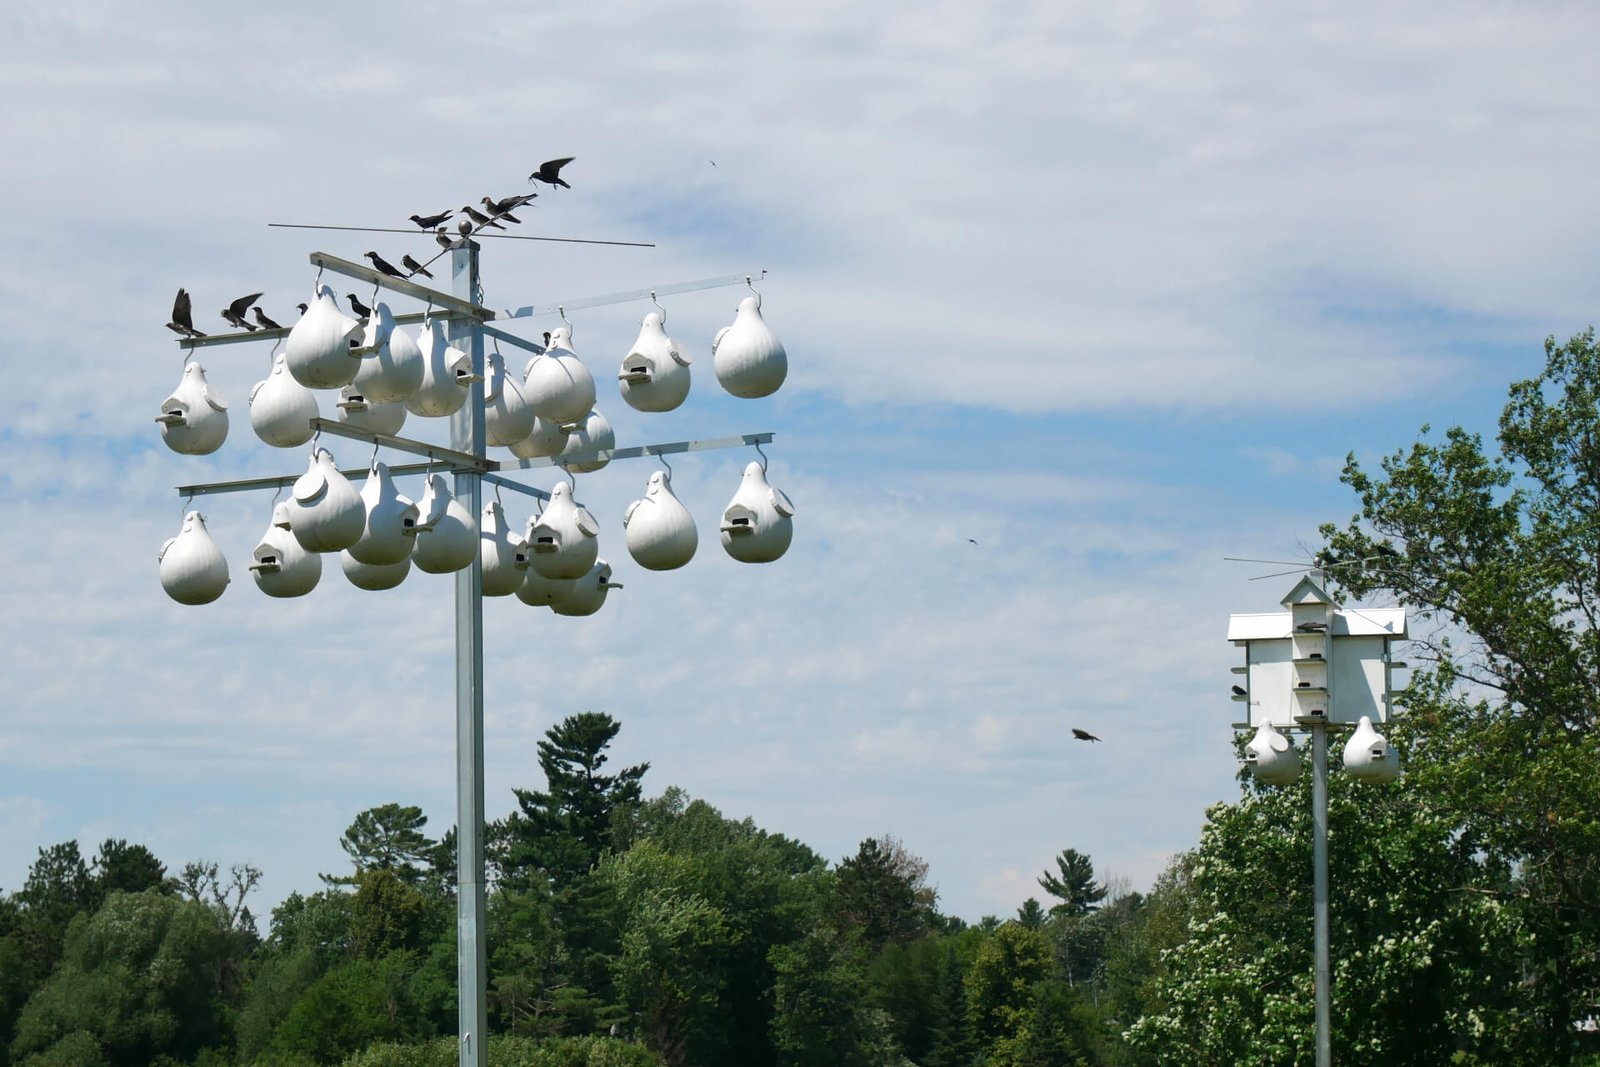 Purple martin houses with at least 12 birds perched above them and several in the sky